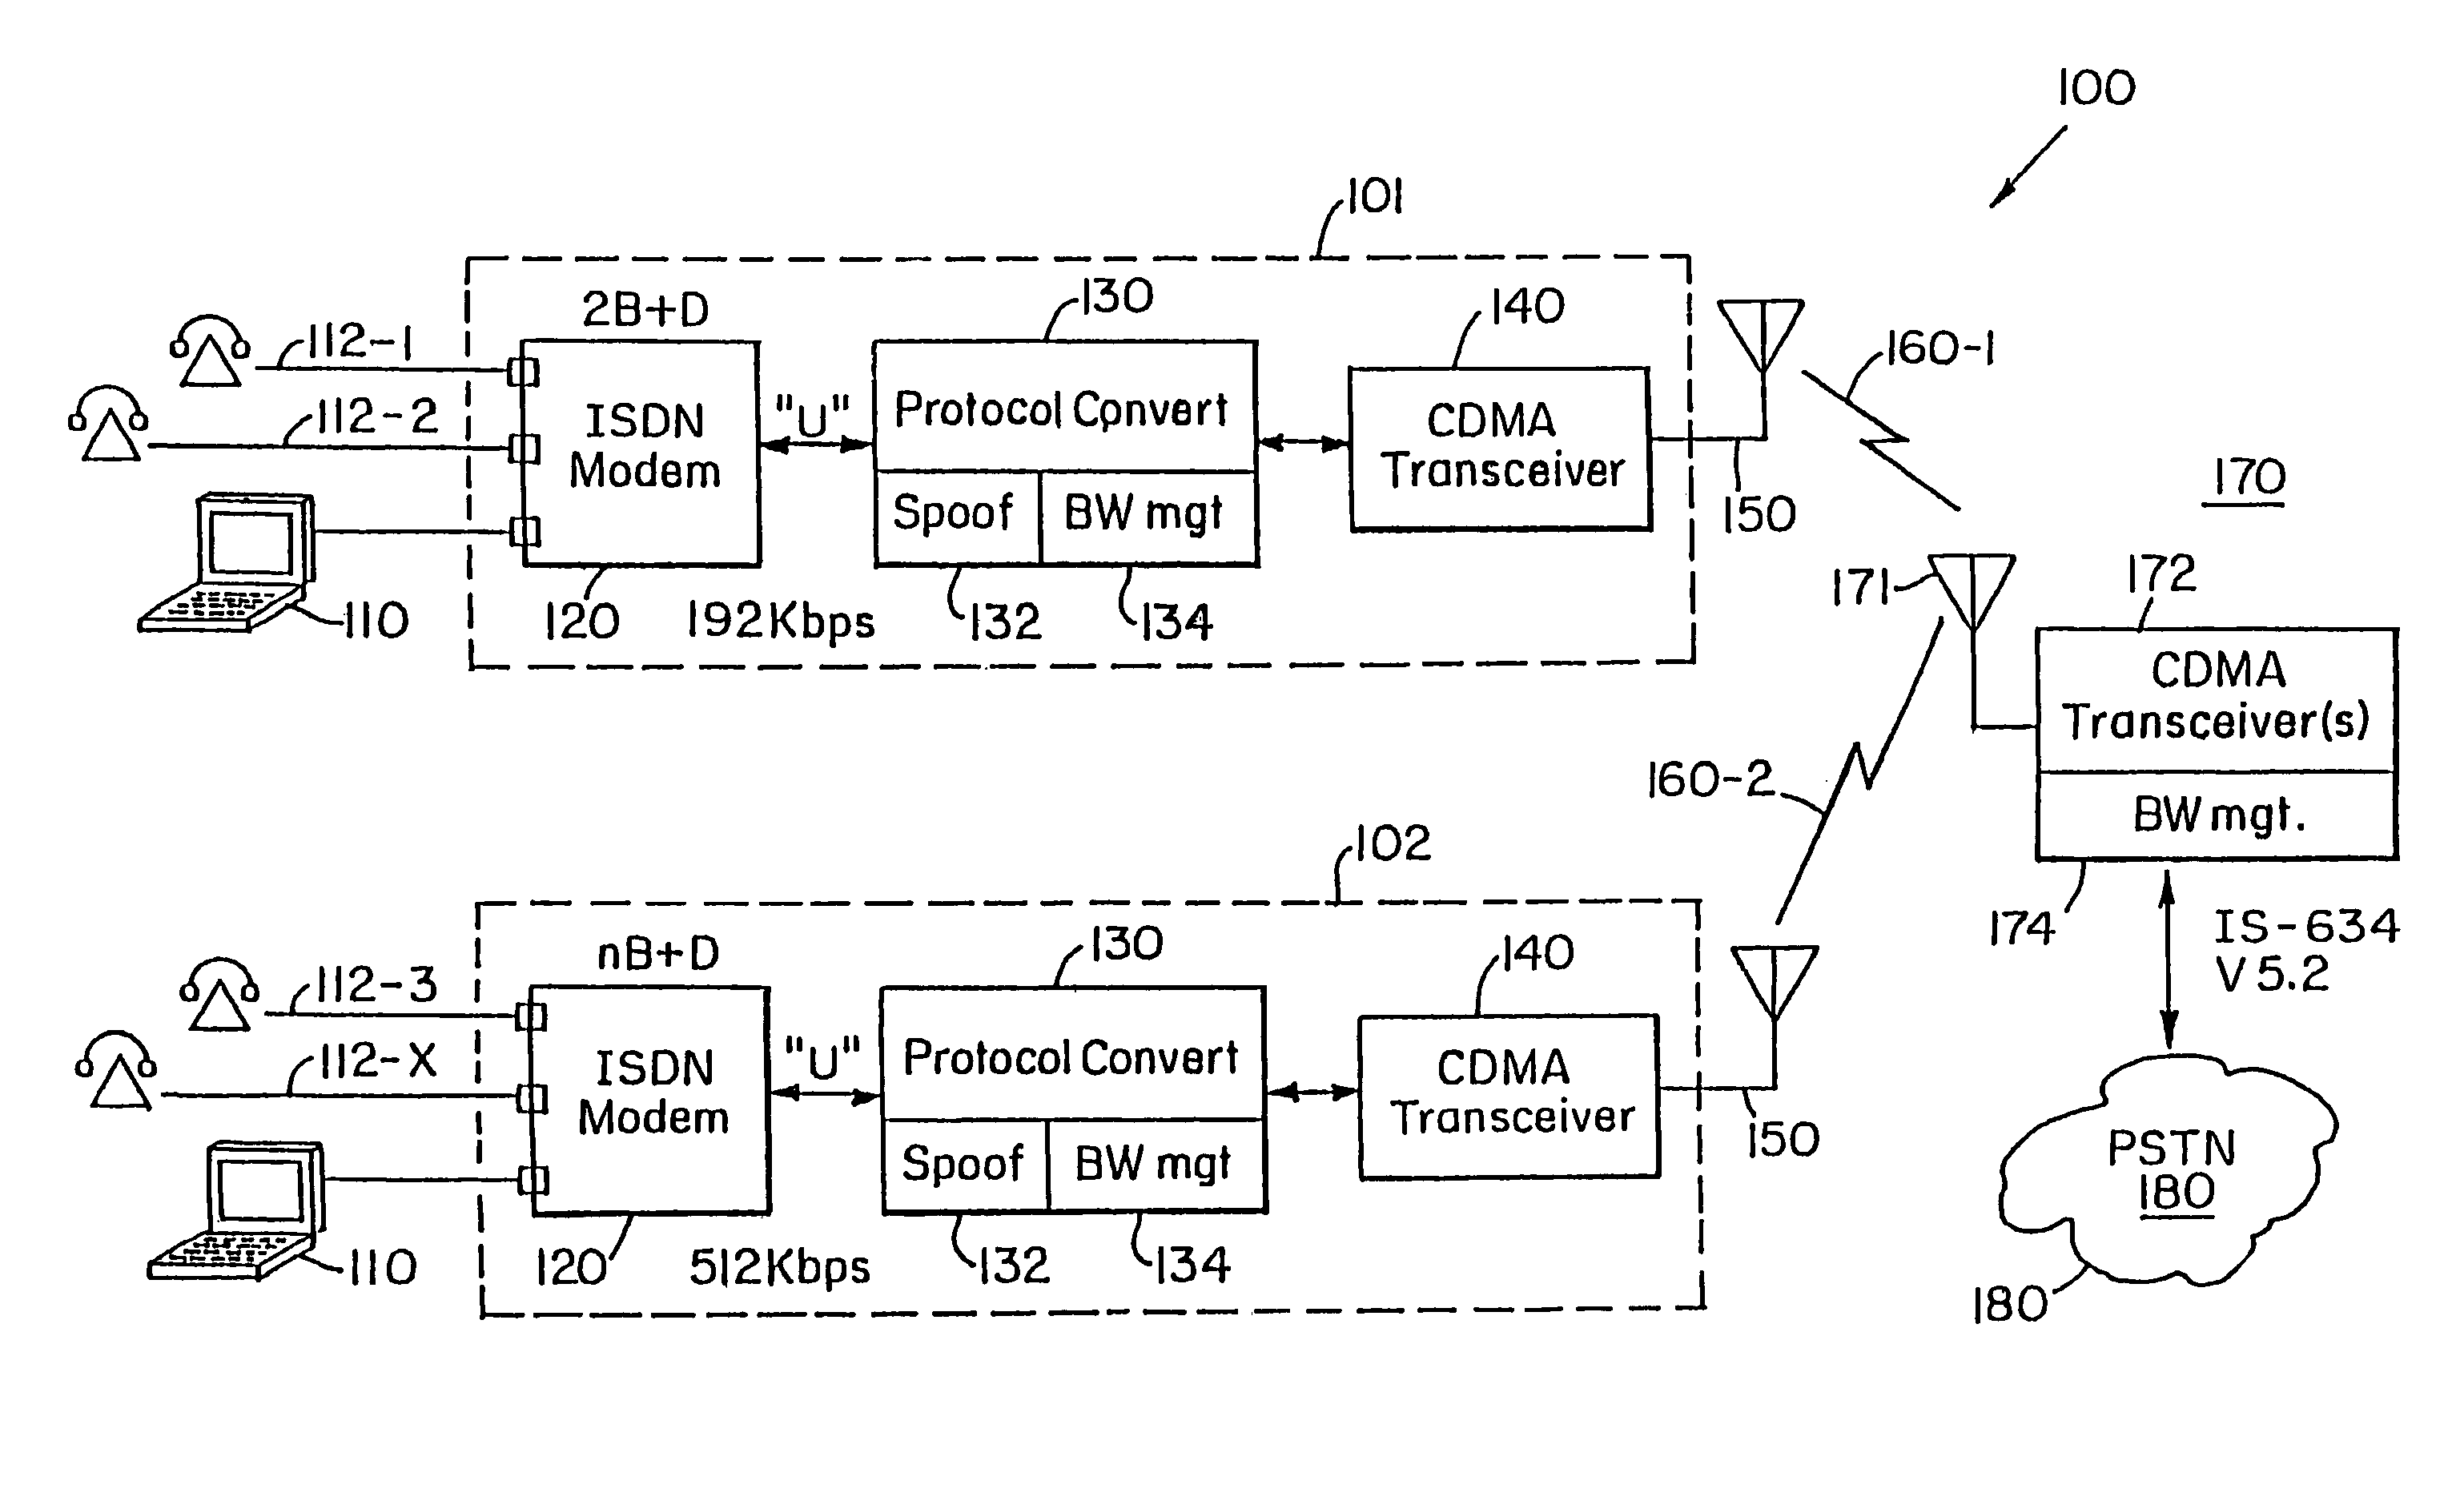 Dynamic bandwidth allocation to transmit a wireless protocol across a code division multiple access (CDMA) radio link